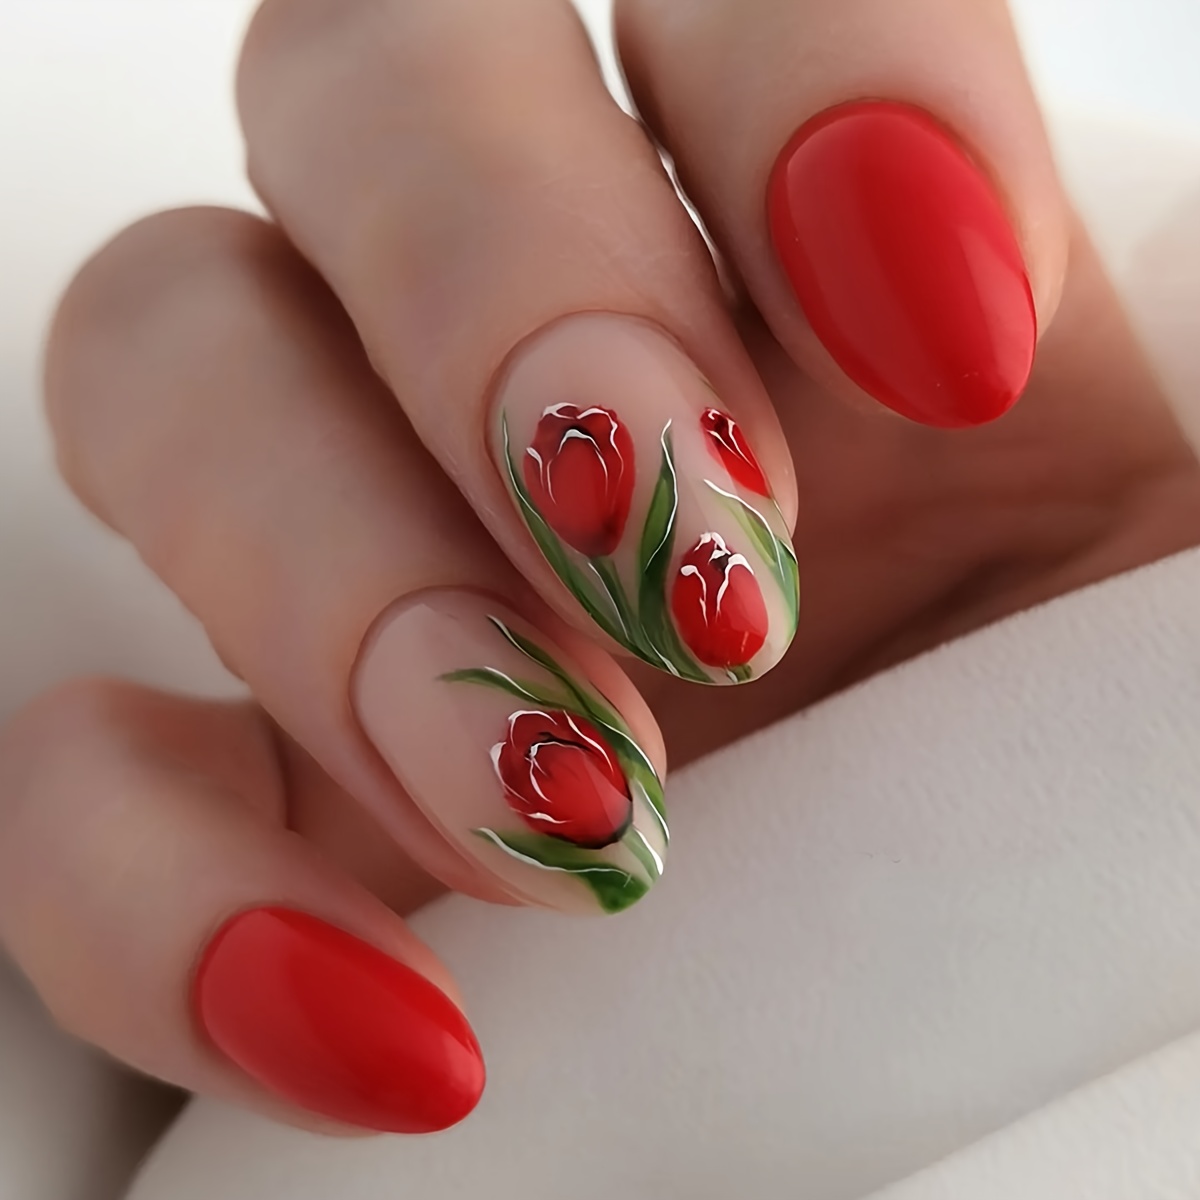 

24pcs Oval Press On Nails Medium, Valentine's Day Fake Nails With Red Rose Flower Design Full Cover Acrylic Nails Reusable Stick On Nails For Women Girls